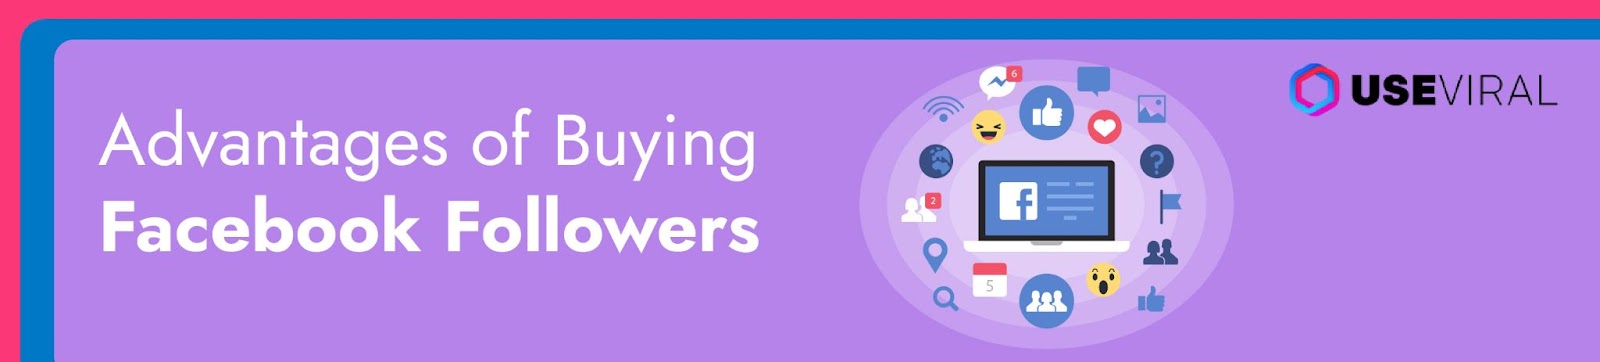 Advantages of Buying Facebook Followers 